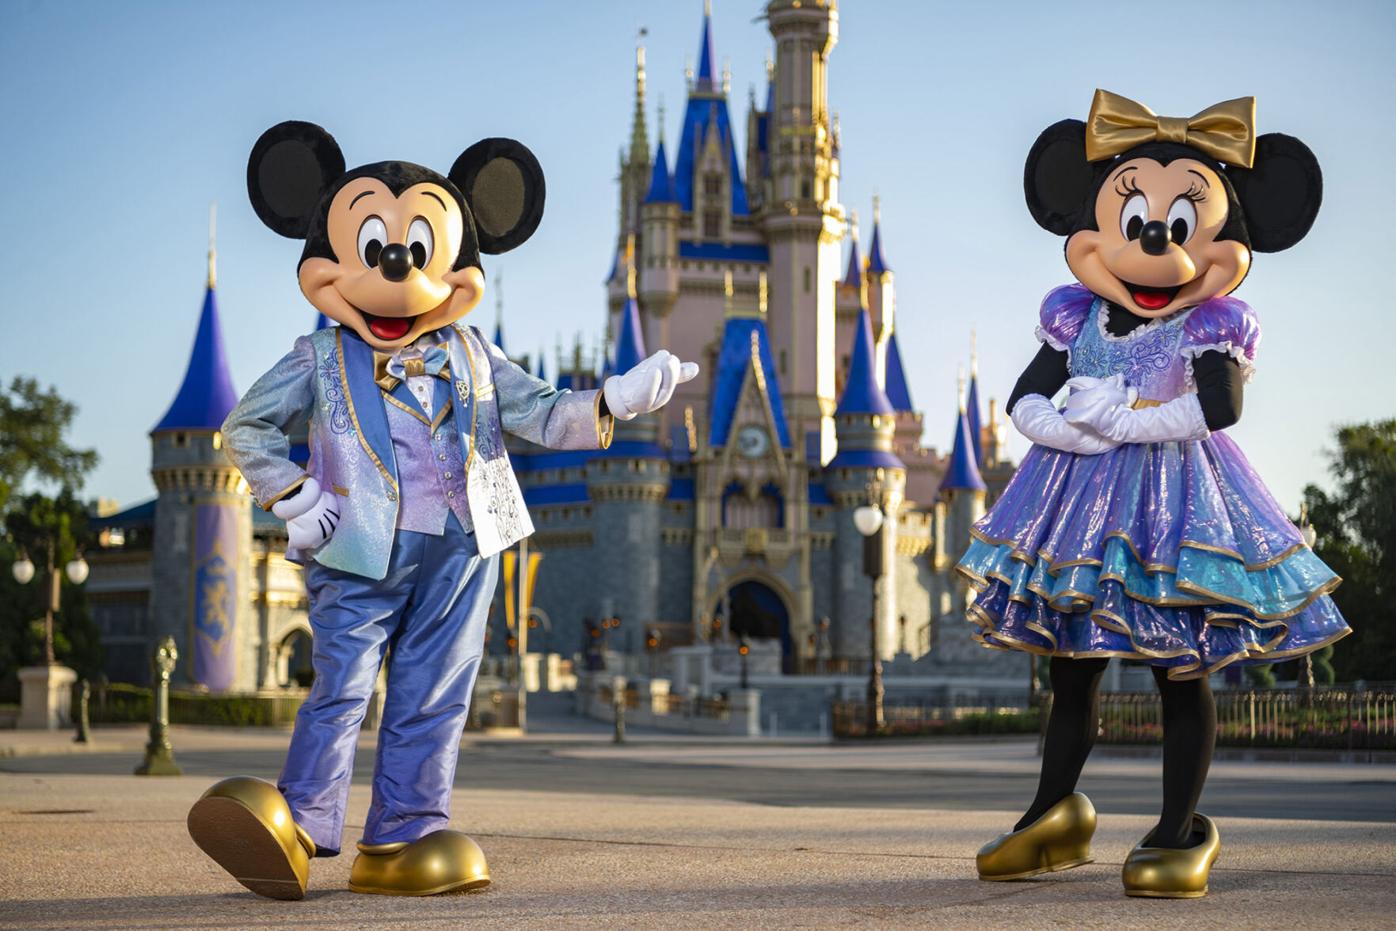 Disney World unveils first of its 50th anniversary plans, Daily Break